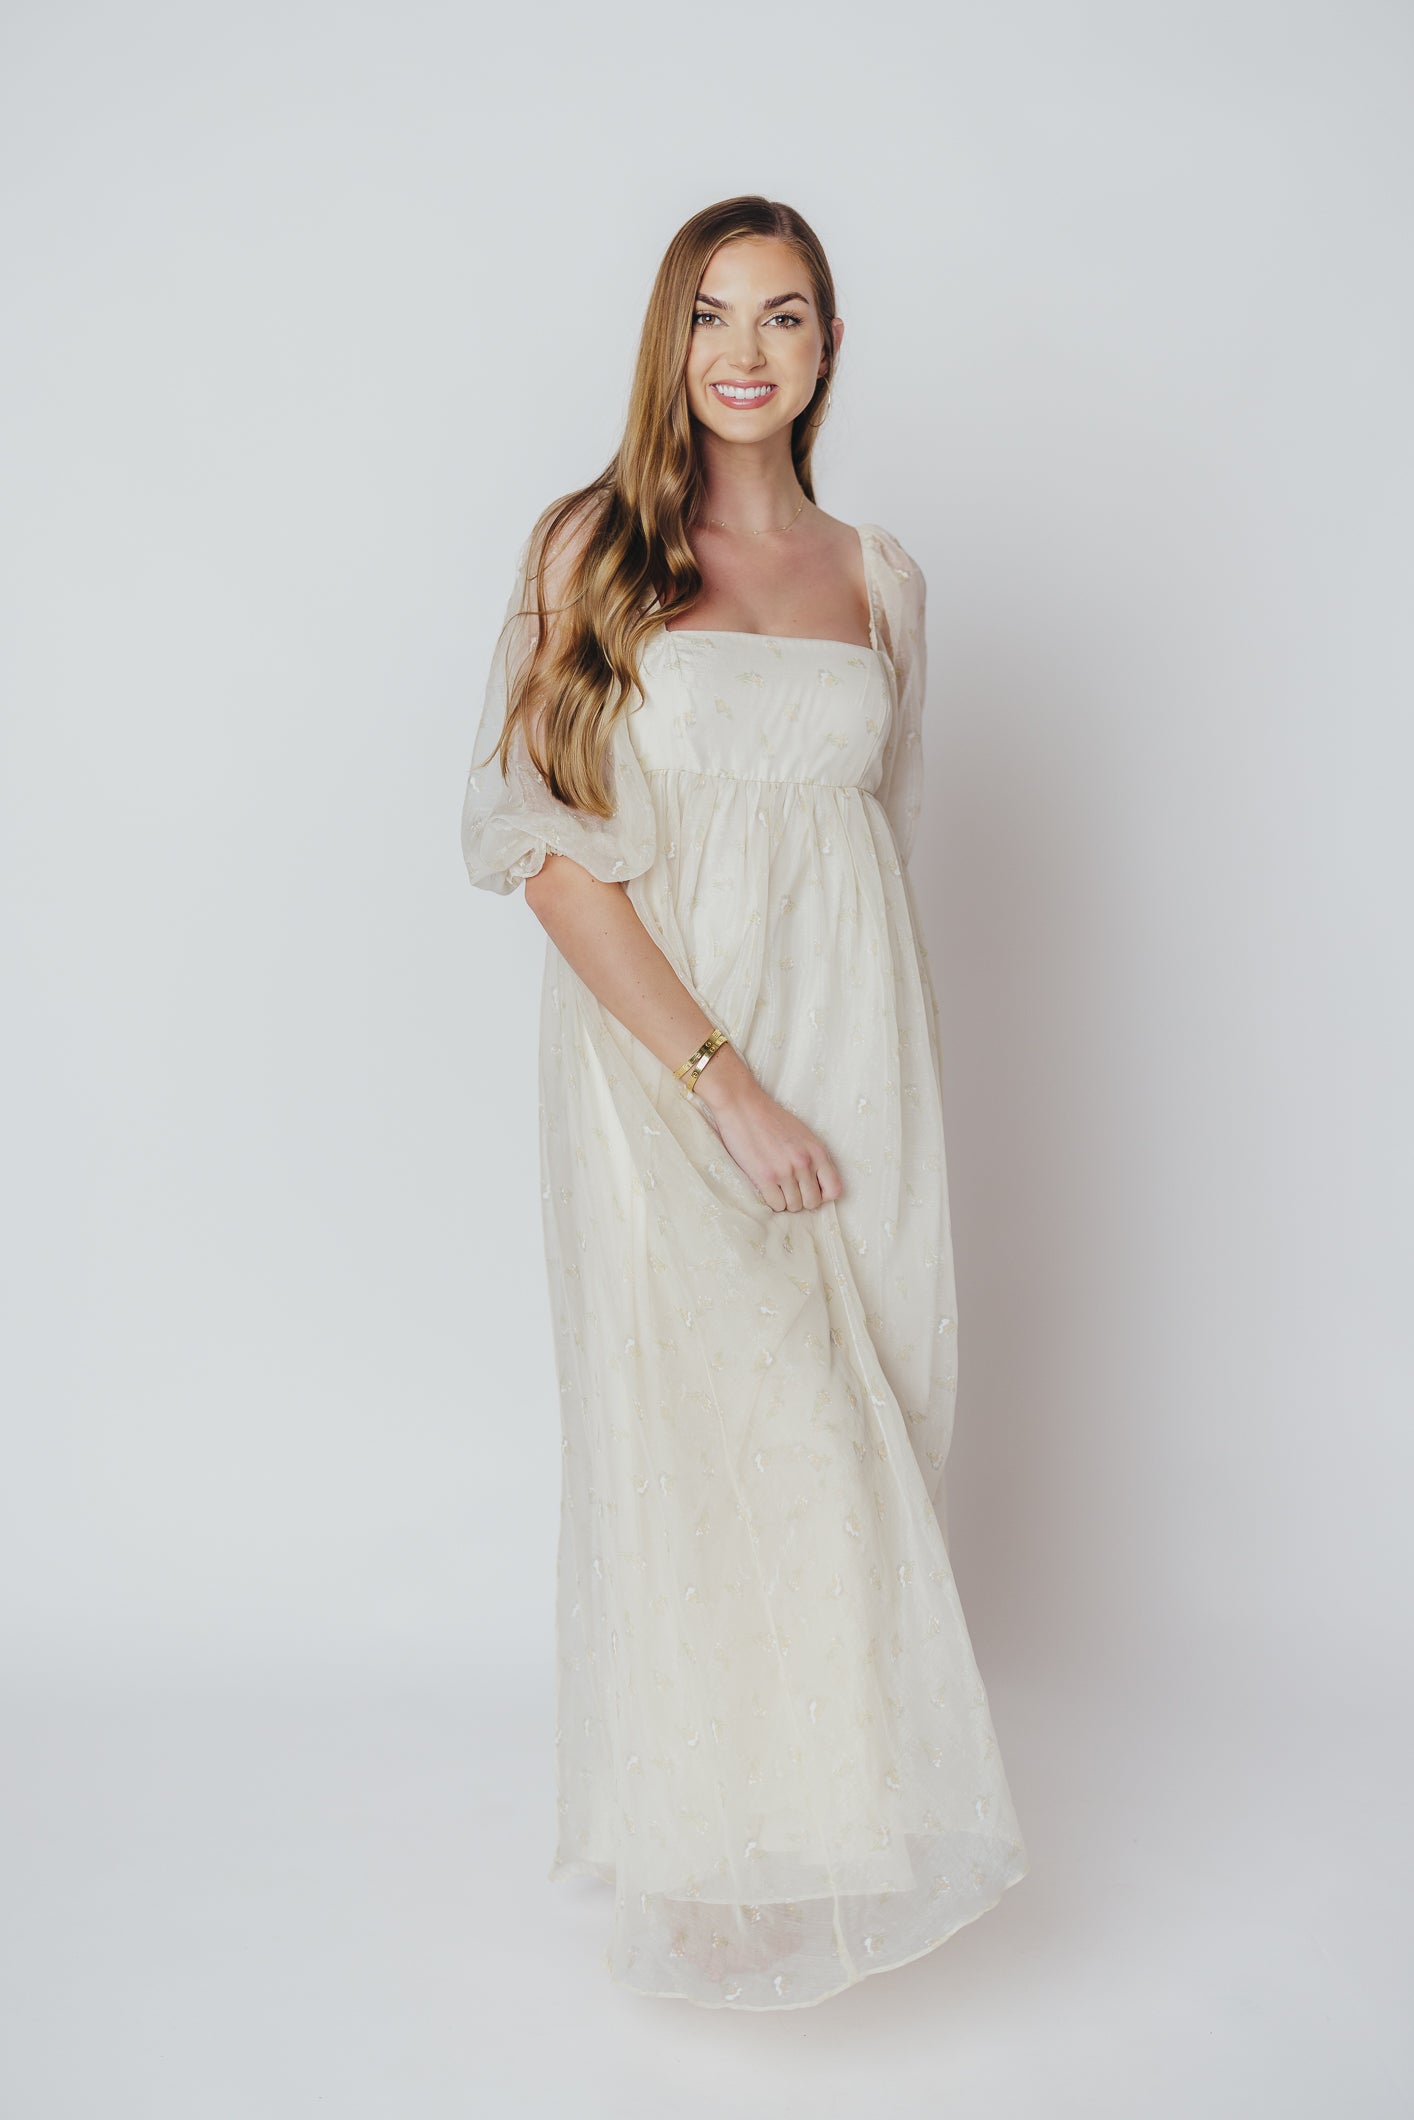 Mona Maxi Dress with Smocking in Butter Floral - Bump Friendly (S-3XL)